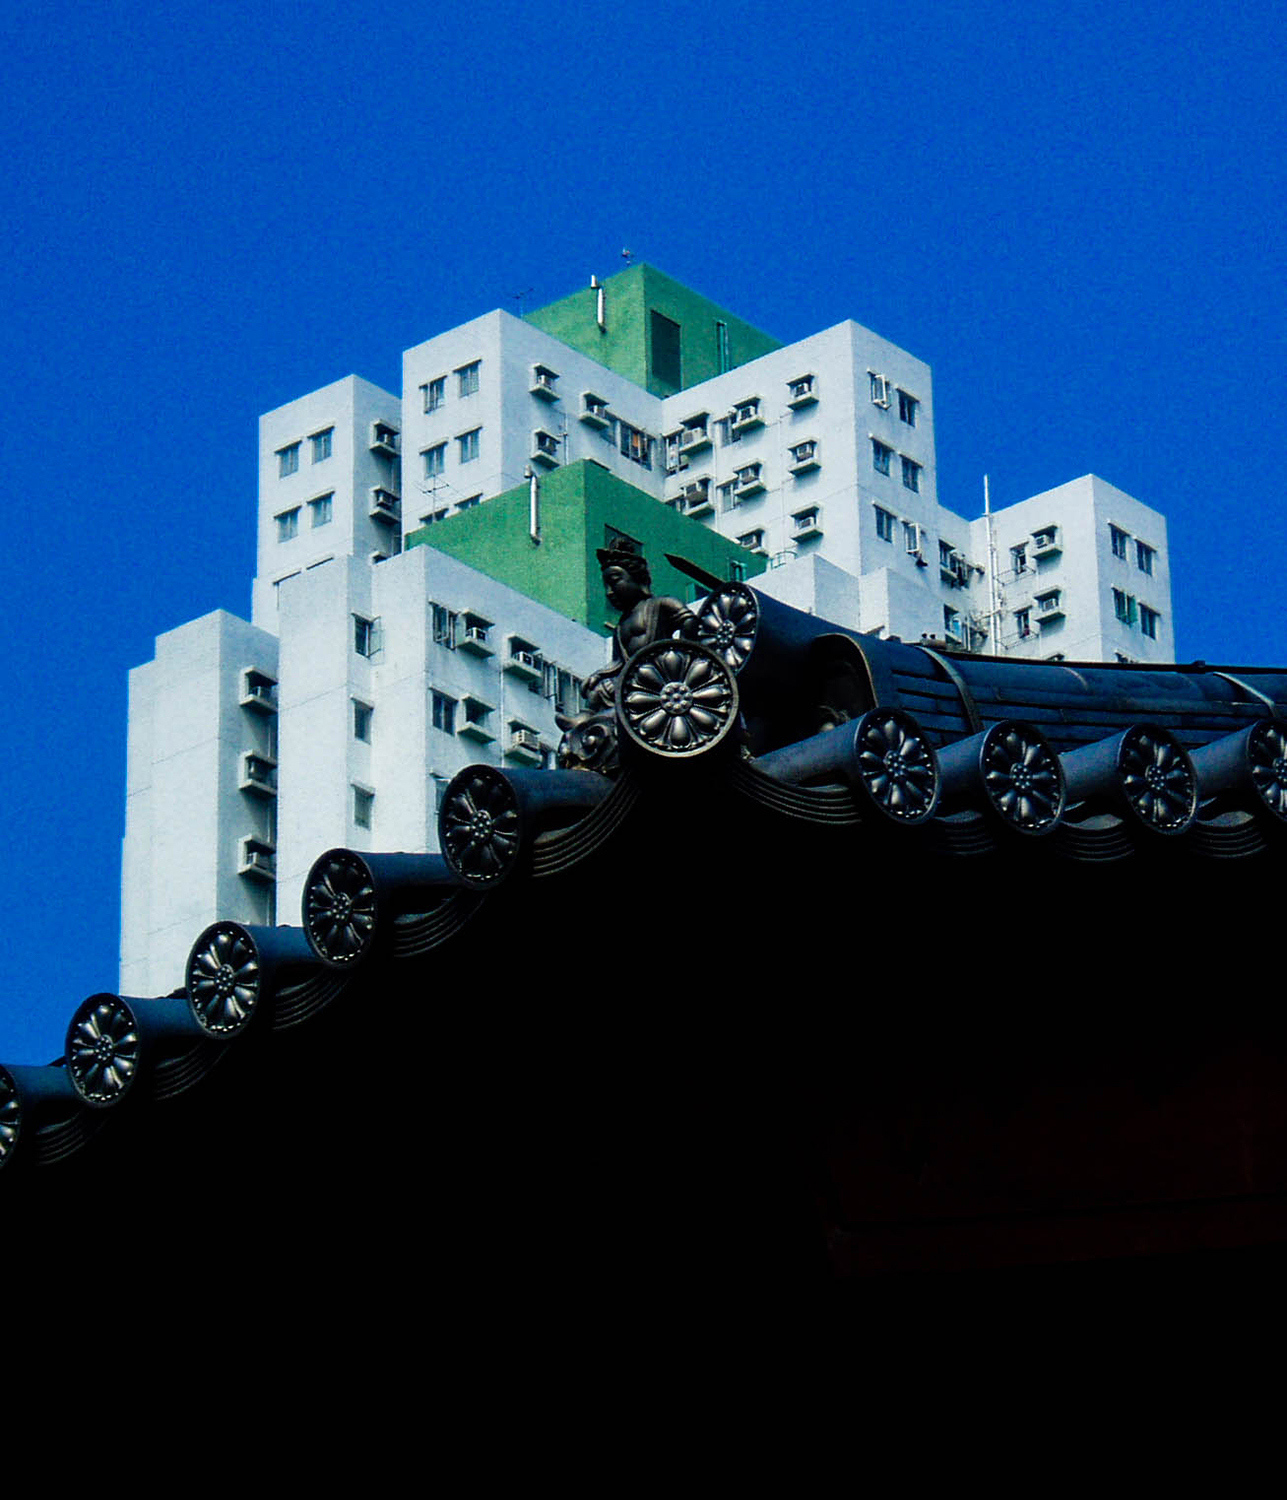 <p>Contrasting styles at the Chi Lin Nunnery, a Buddhist temple complex in Kowloon. <br /></p>